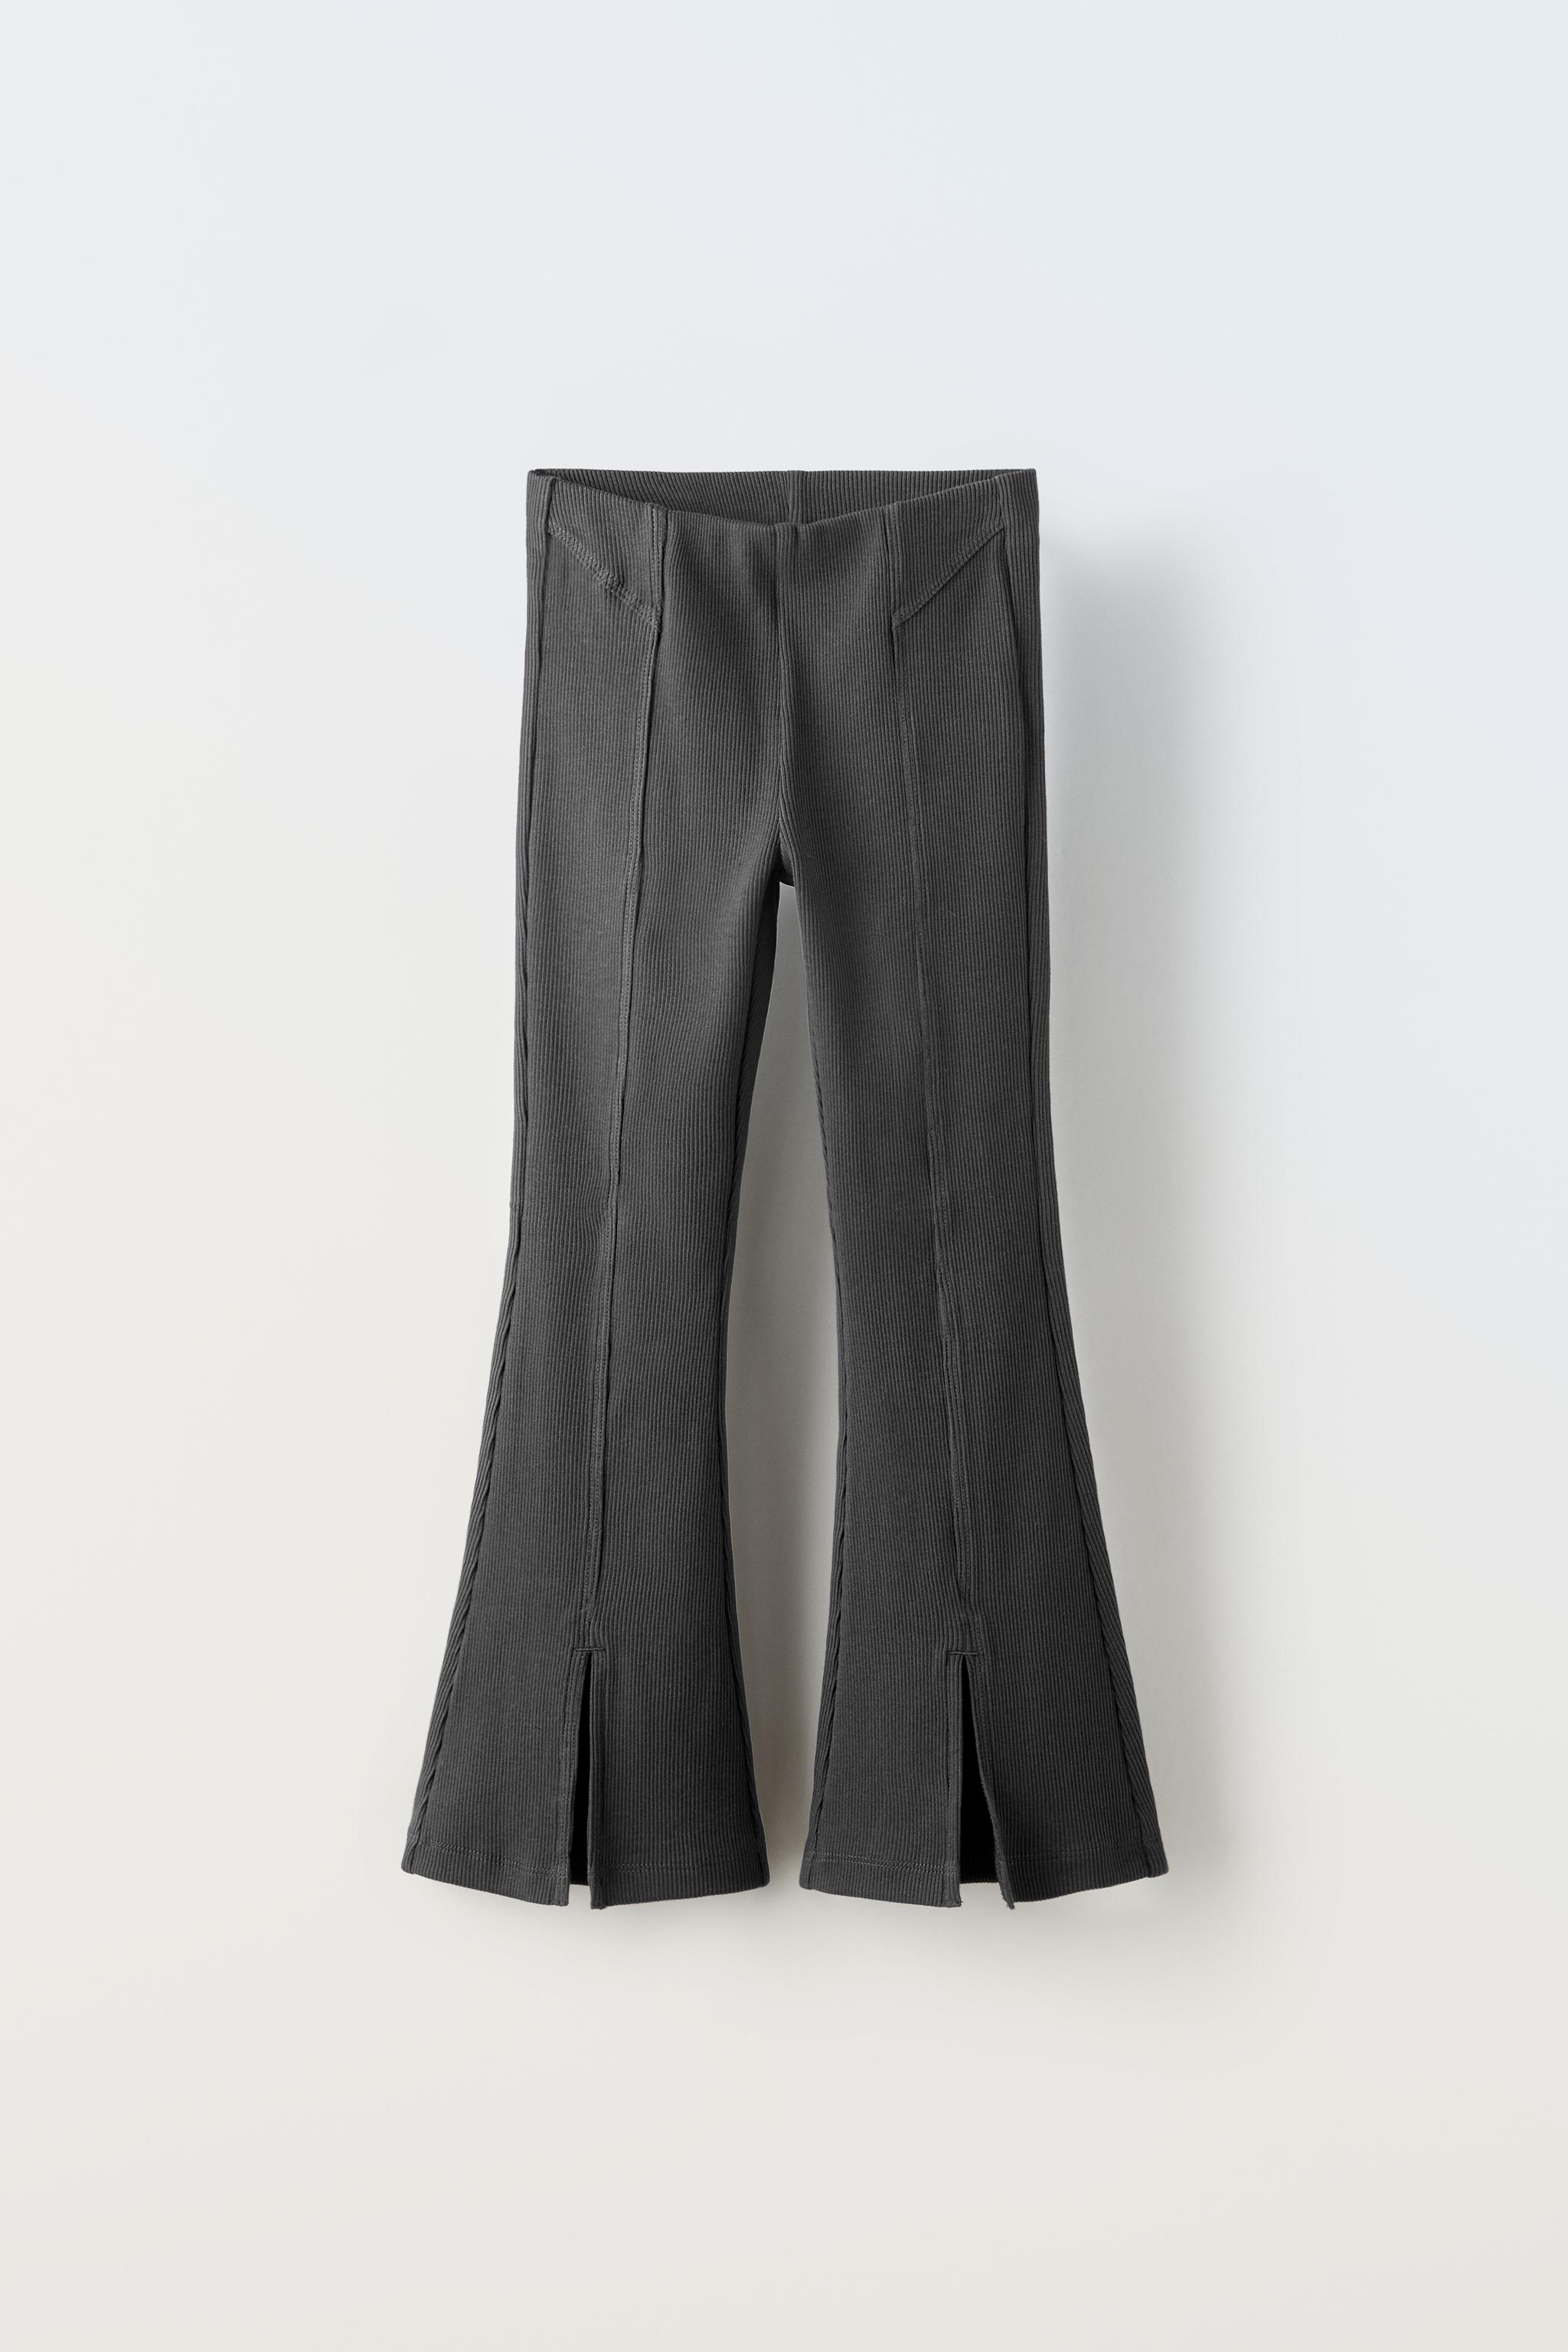 ZARA Woman TROUSERS, KNIT LEGGINGS WITH RIBBED TRIMS Grey Marl